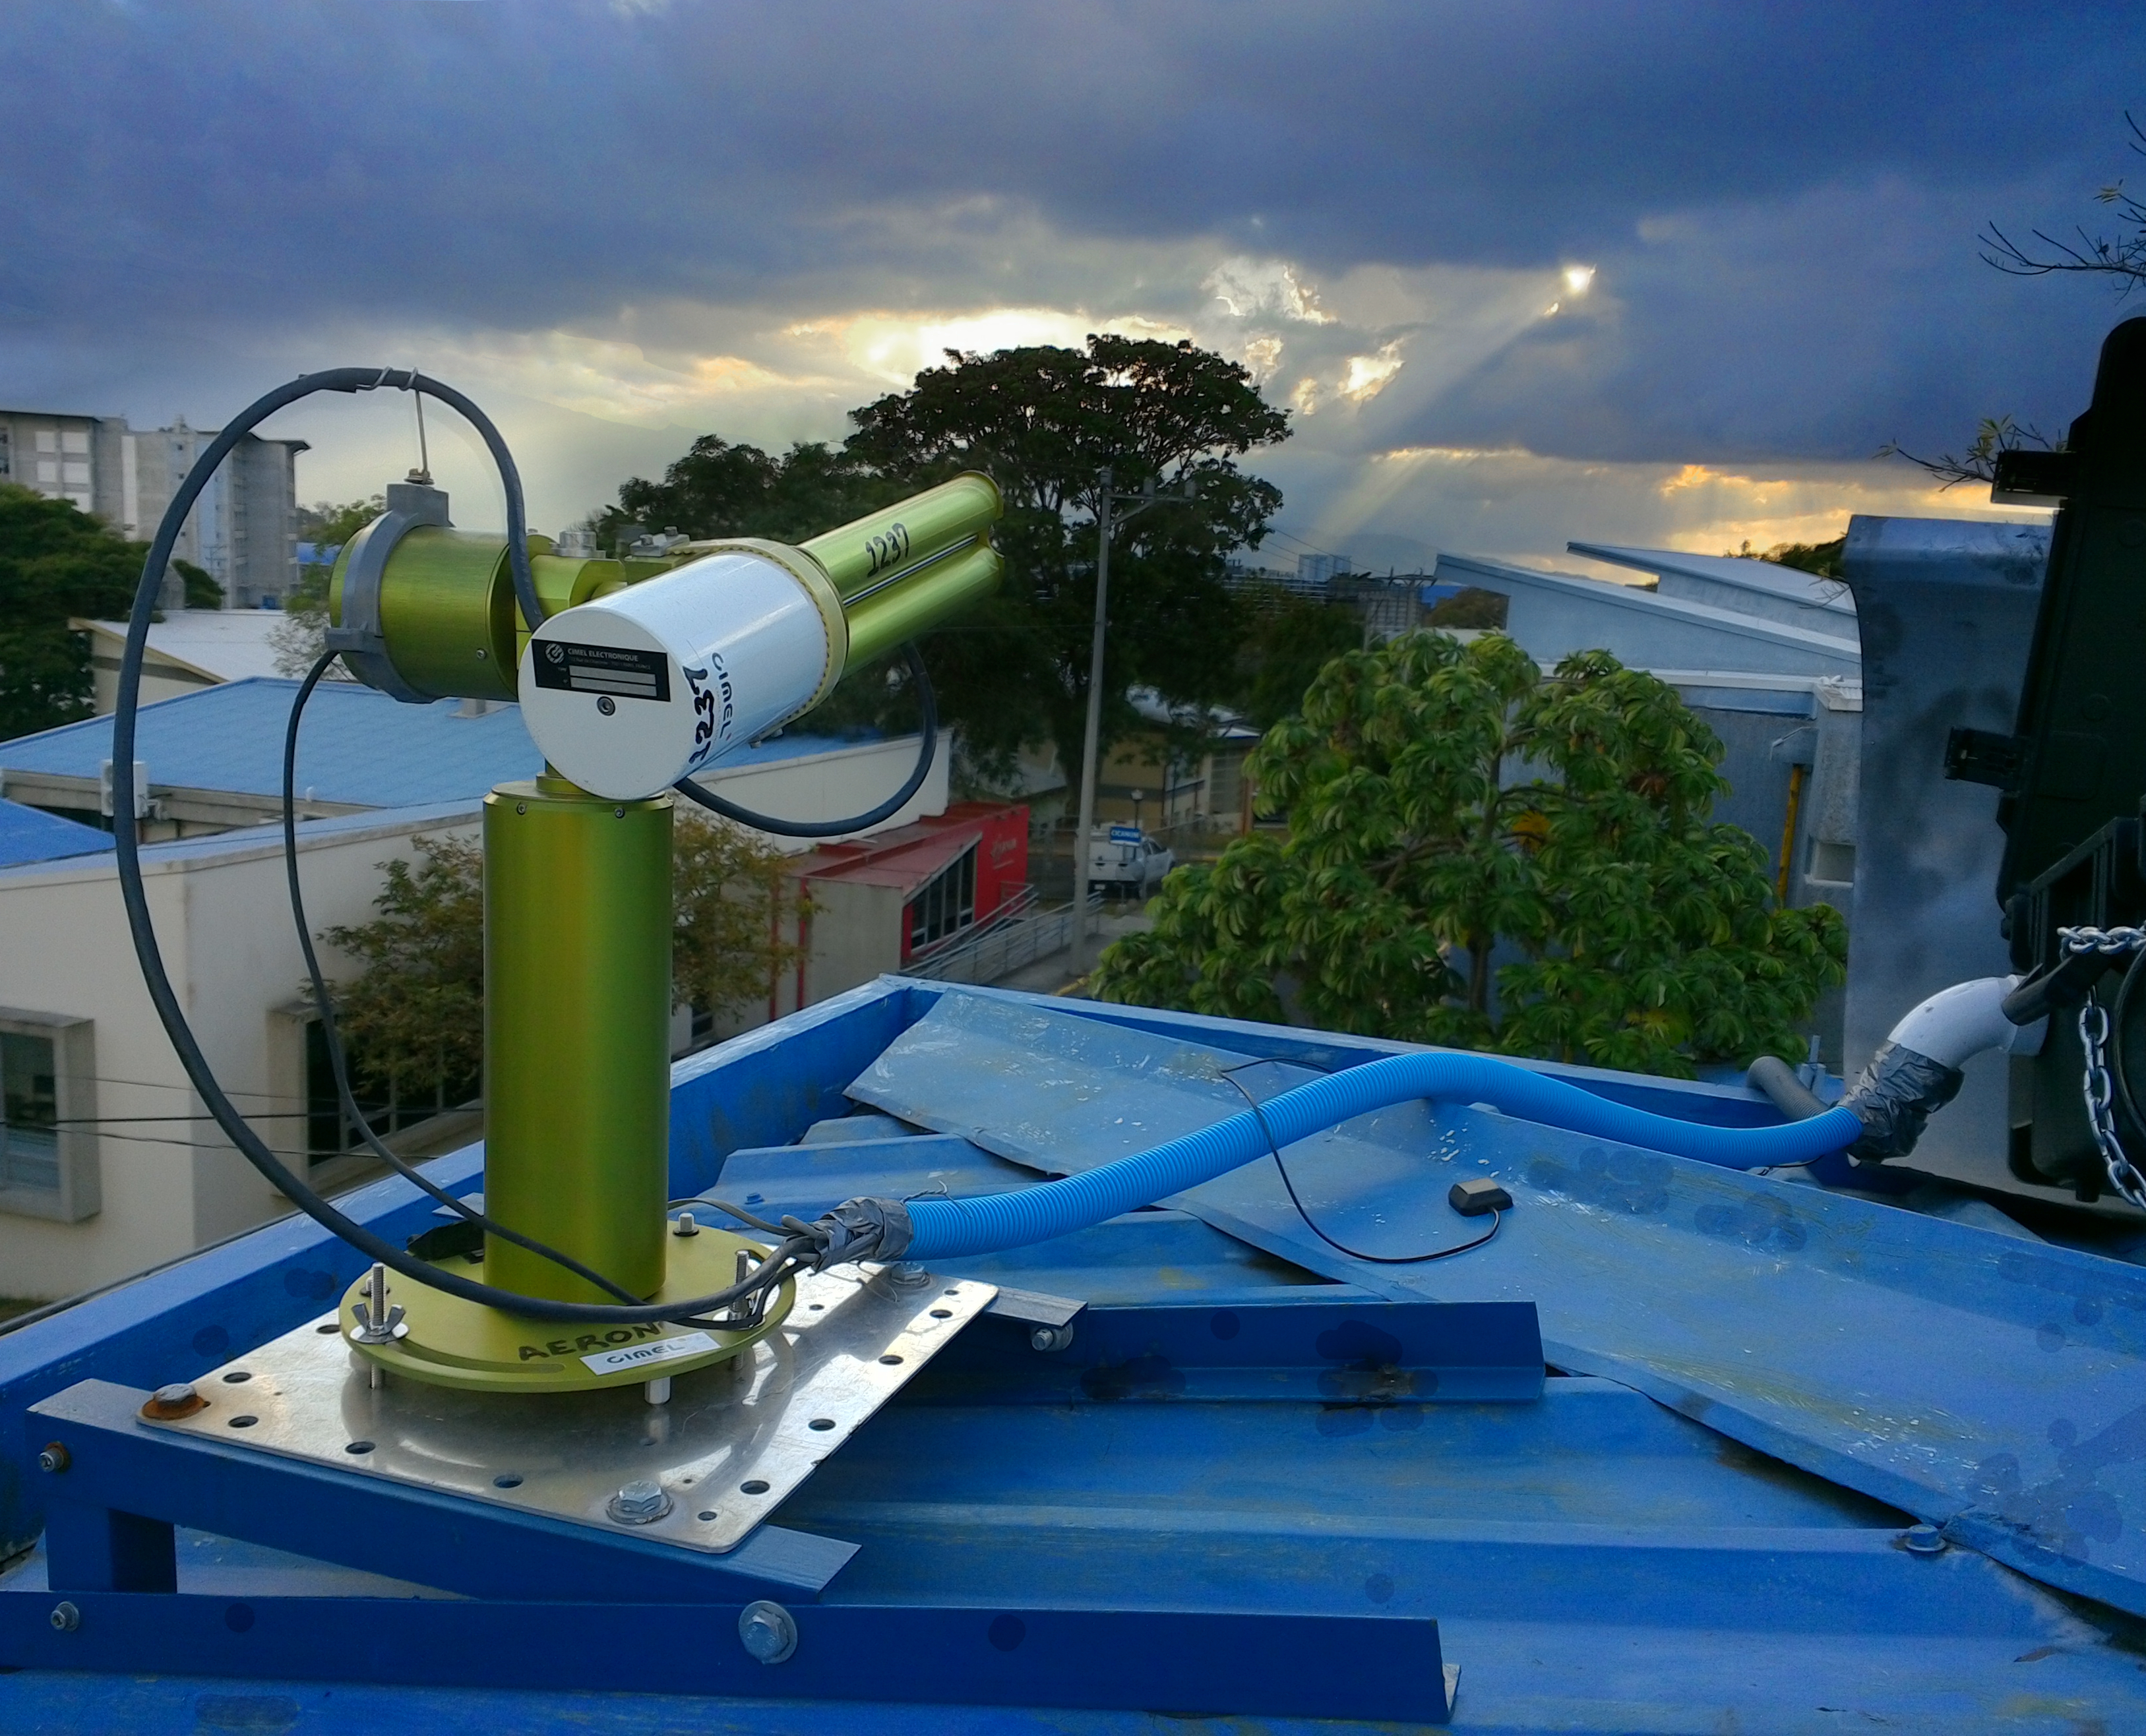 Cimel Model T installed on the roof of the Gaslab at the Universidad de Costa Rica.